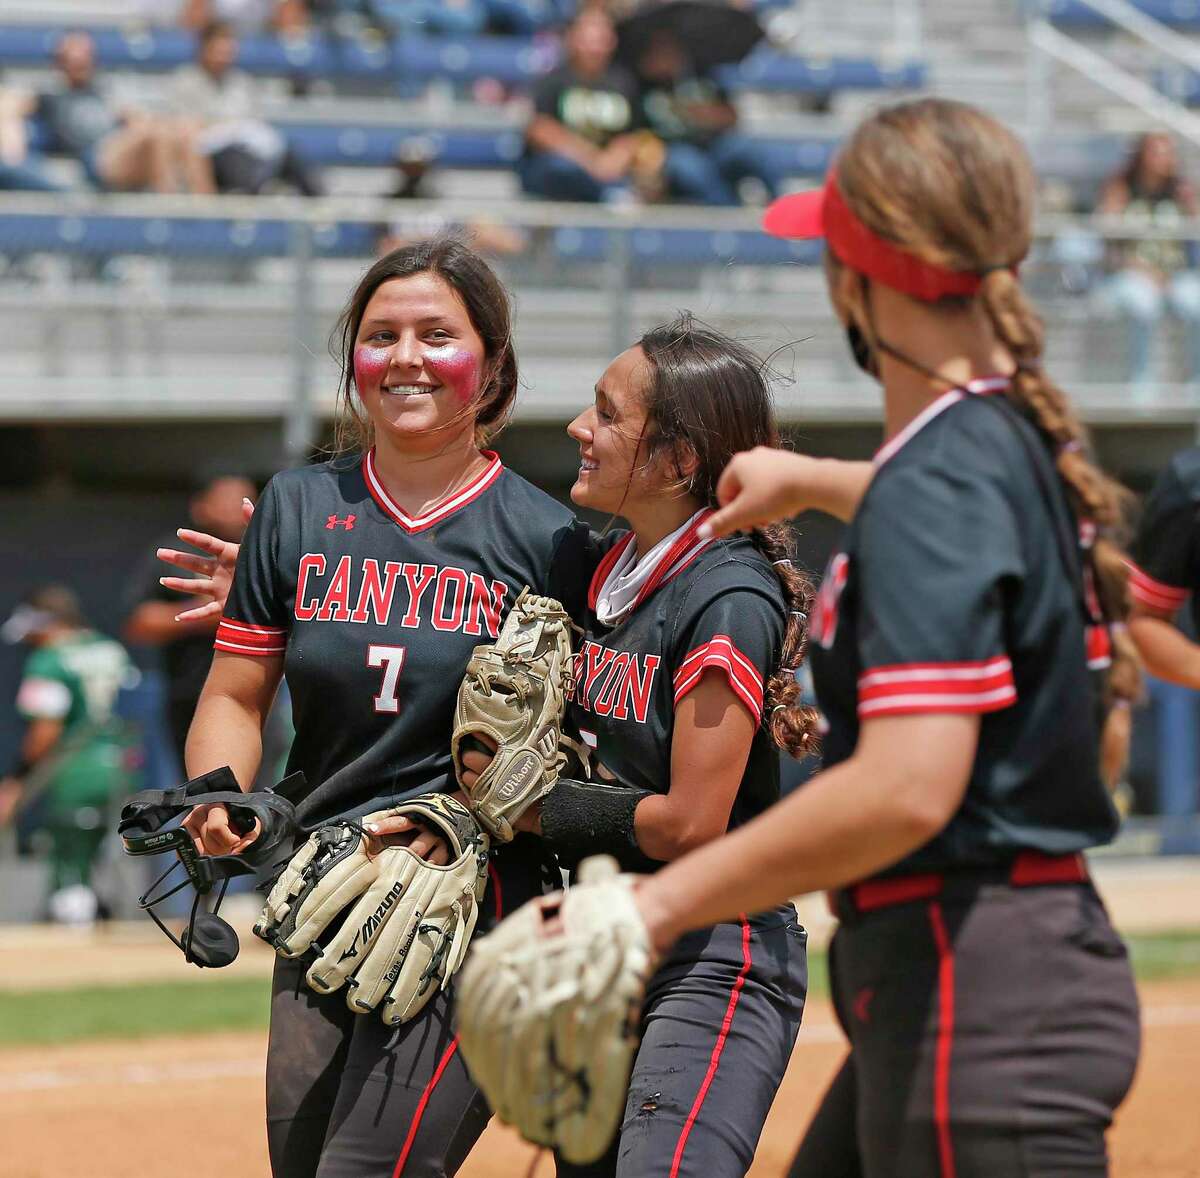 Canyon Bella Mitchell #7 is congratulated by teammates after striking out the batter to end the third inning. Softball playoff Game 2 of best of 3 between New Braunfels Canyon and Southwest Legacy on Saturday, May 8, 2021 at St. Mary's University.